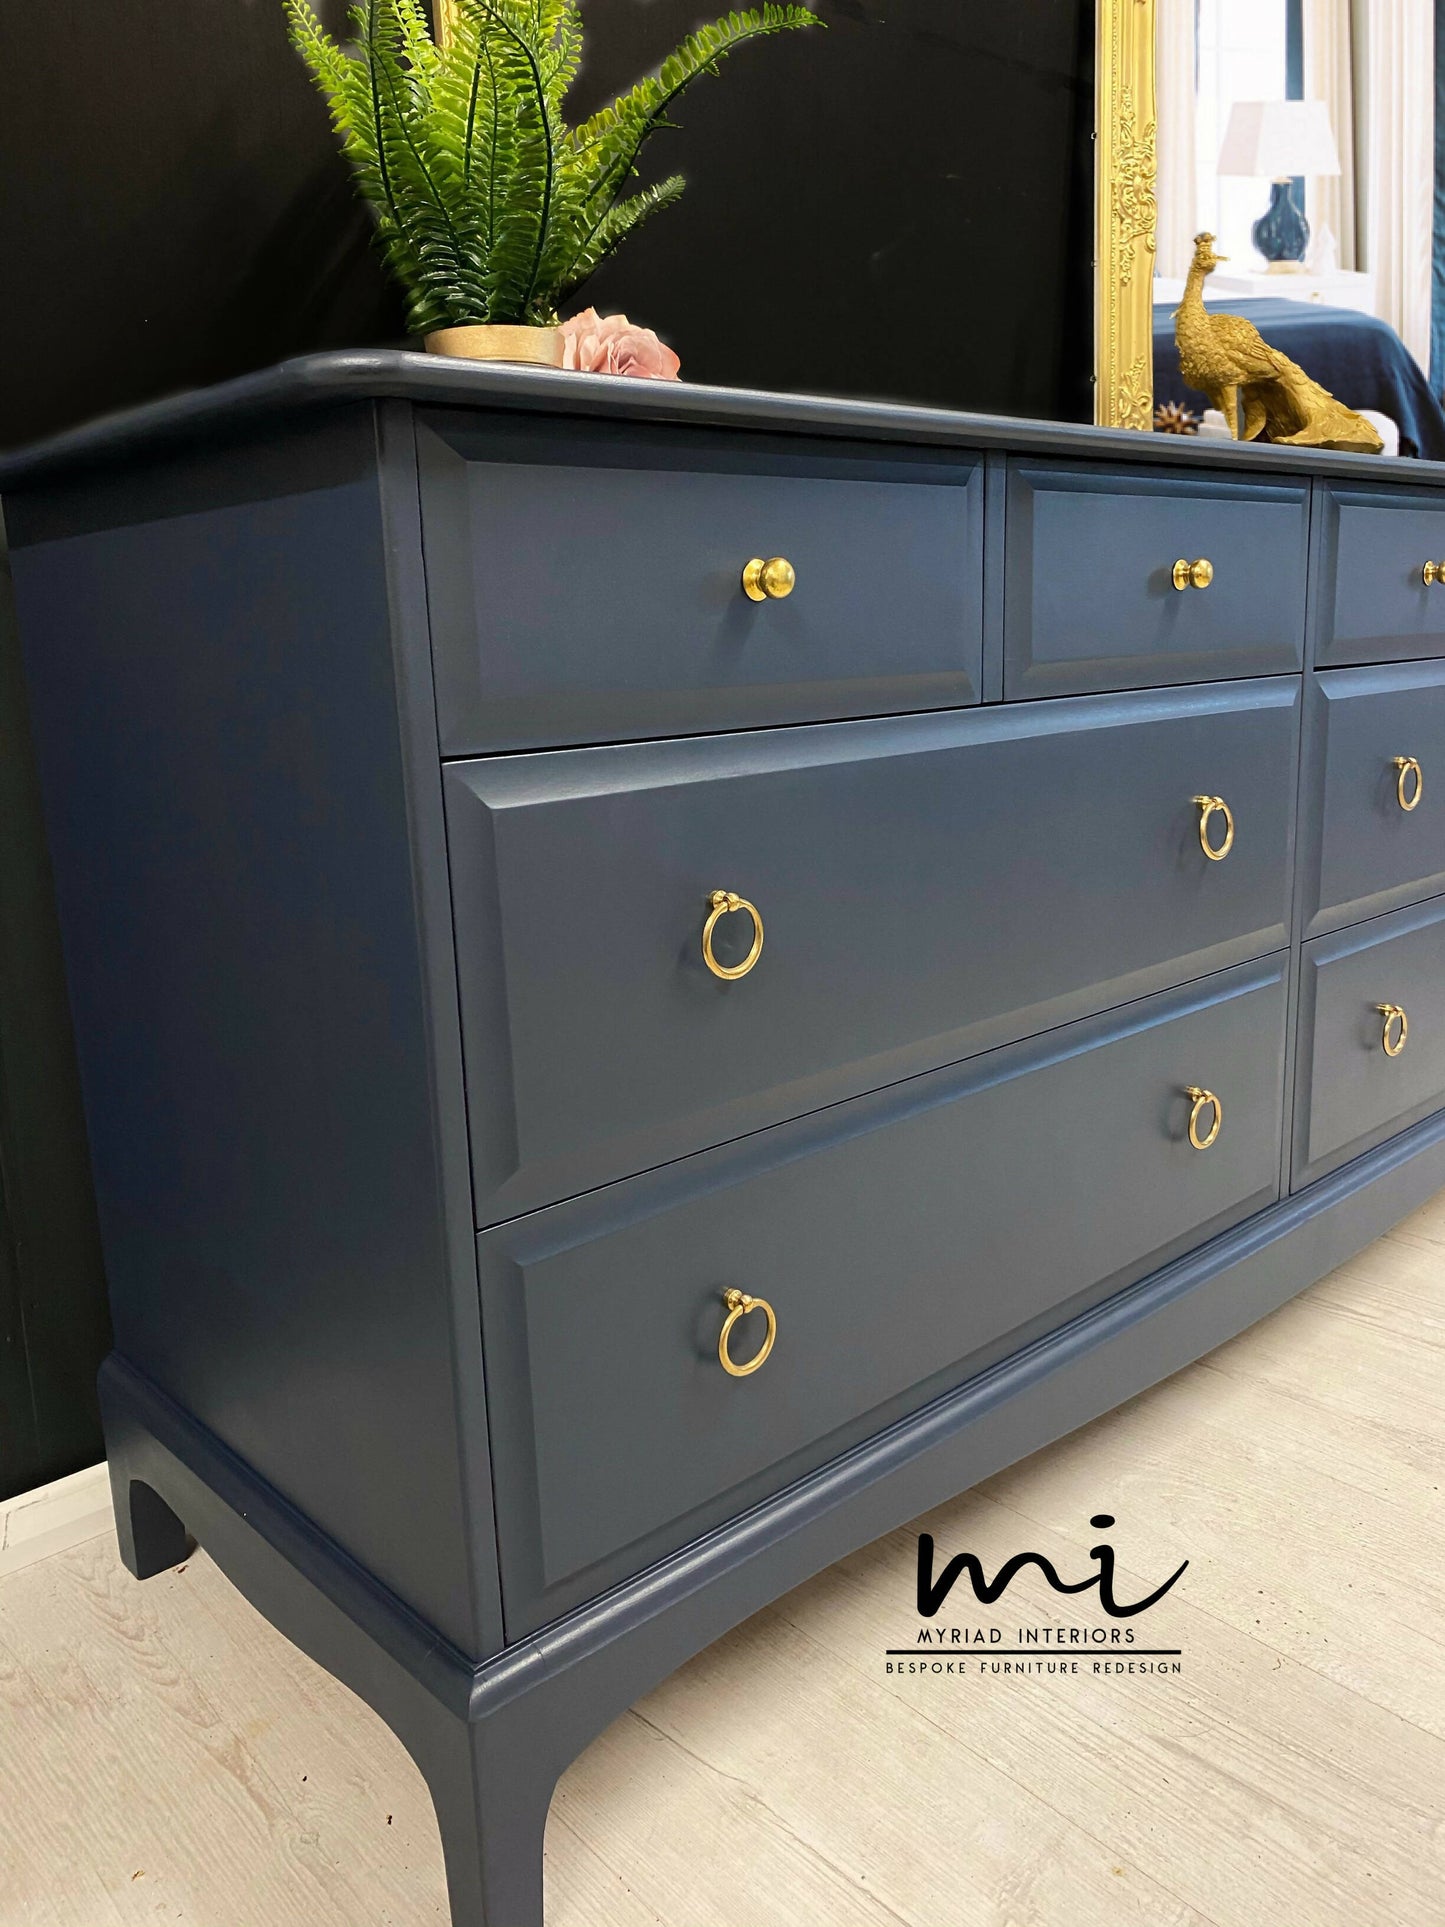 Refurbished vintage Stag Minstrel captains chest, mid century chest of drawers, navy blue dresser, extended large drawers, retro, sideboard